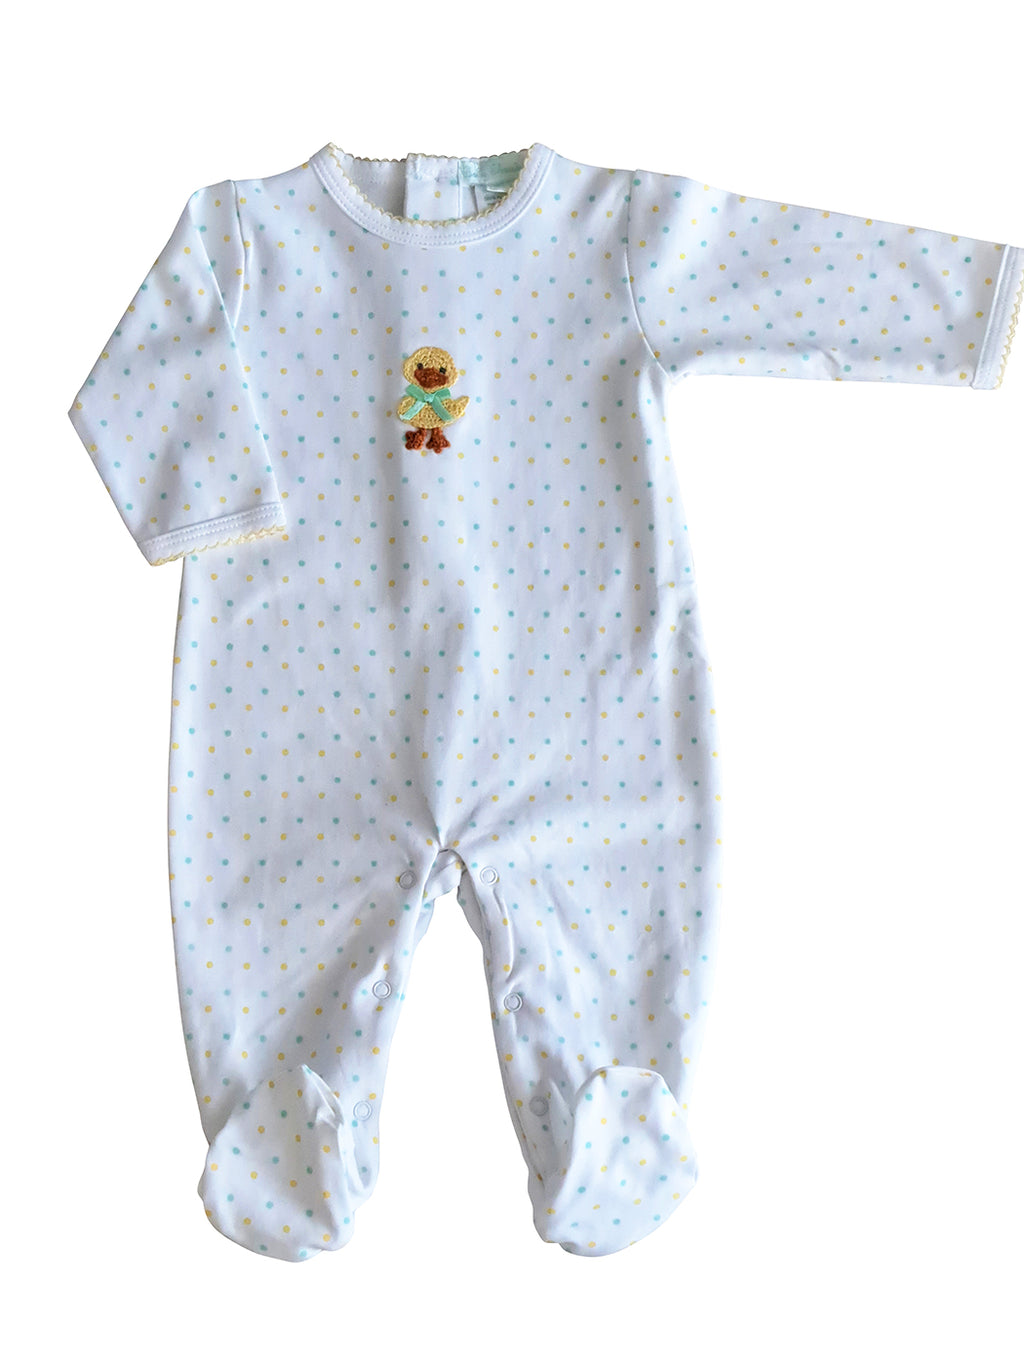 Ducky Polka Dots Baby's Footie - Little Threads Inc. Children's Clothing